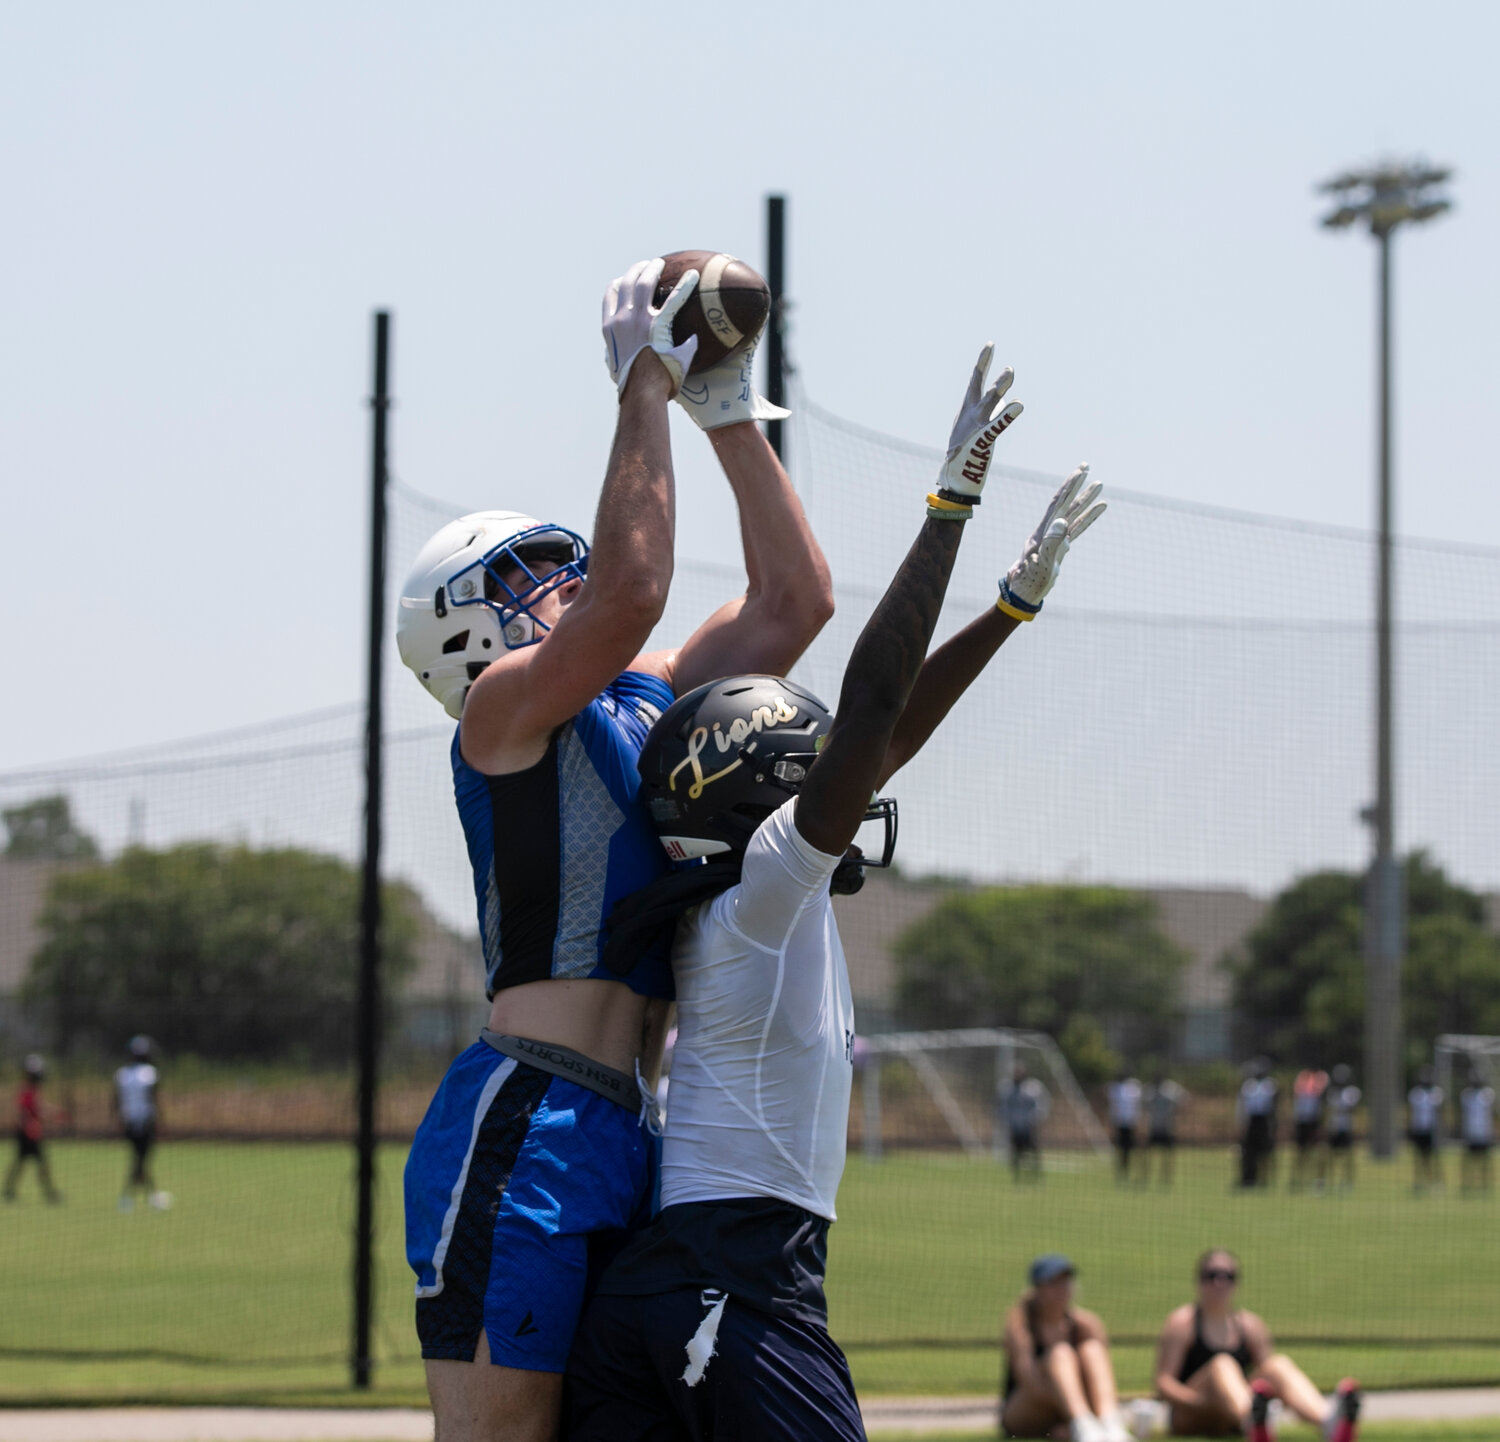 Sanders Daniell leaps to secure a catch in the end zone during the Fairhope Pirates’ second-round bracket game against the Foley Lions as part of the Foley 7-on-7 Showdown hosted by Foley Sports Tourism Thursday, June 29. The catch was nullified due to an unrelated penalty but later that day, Daniell announced his commitment to Harvard.